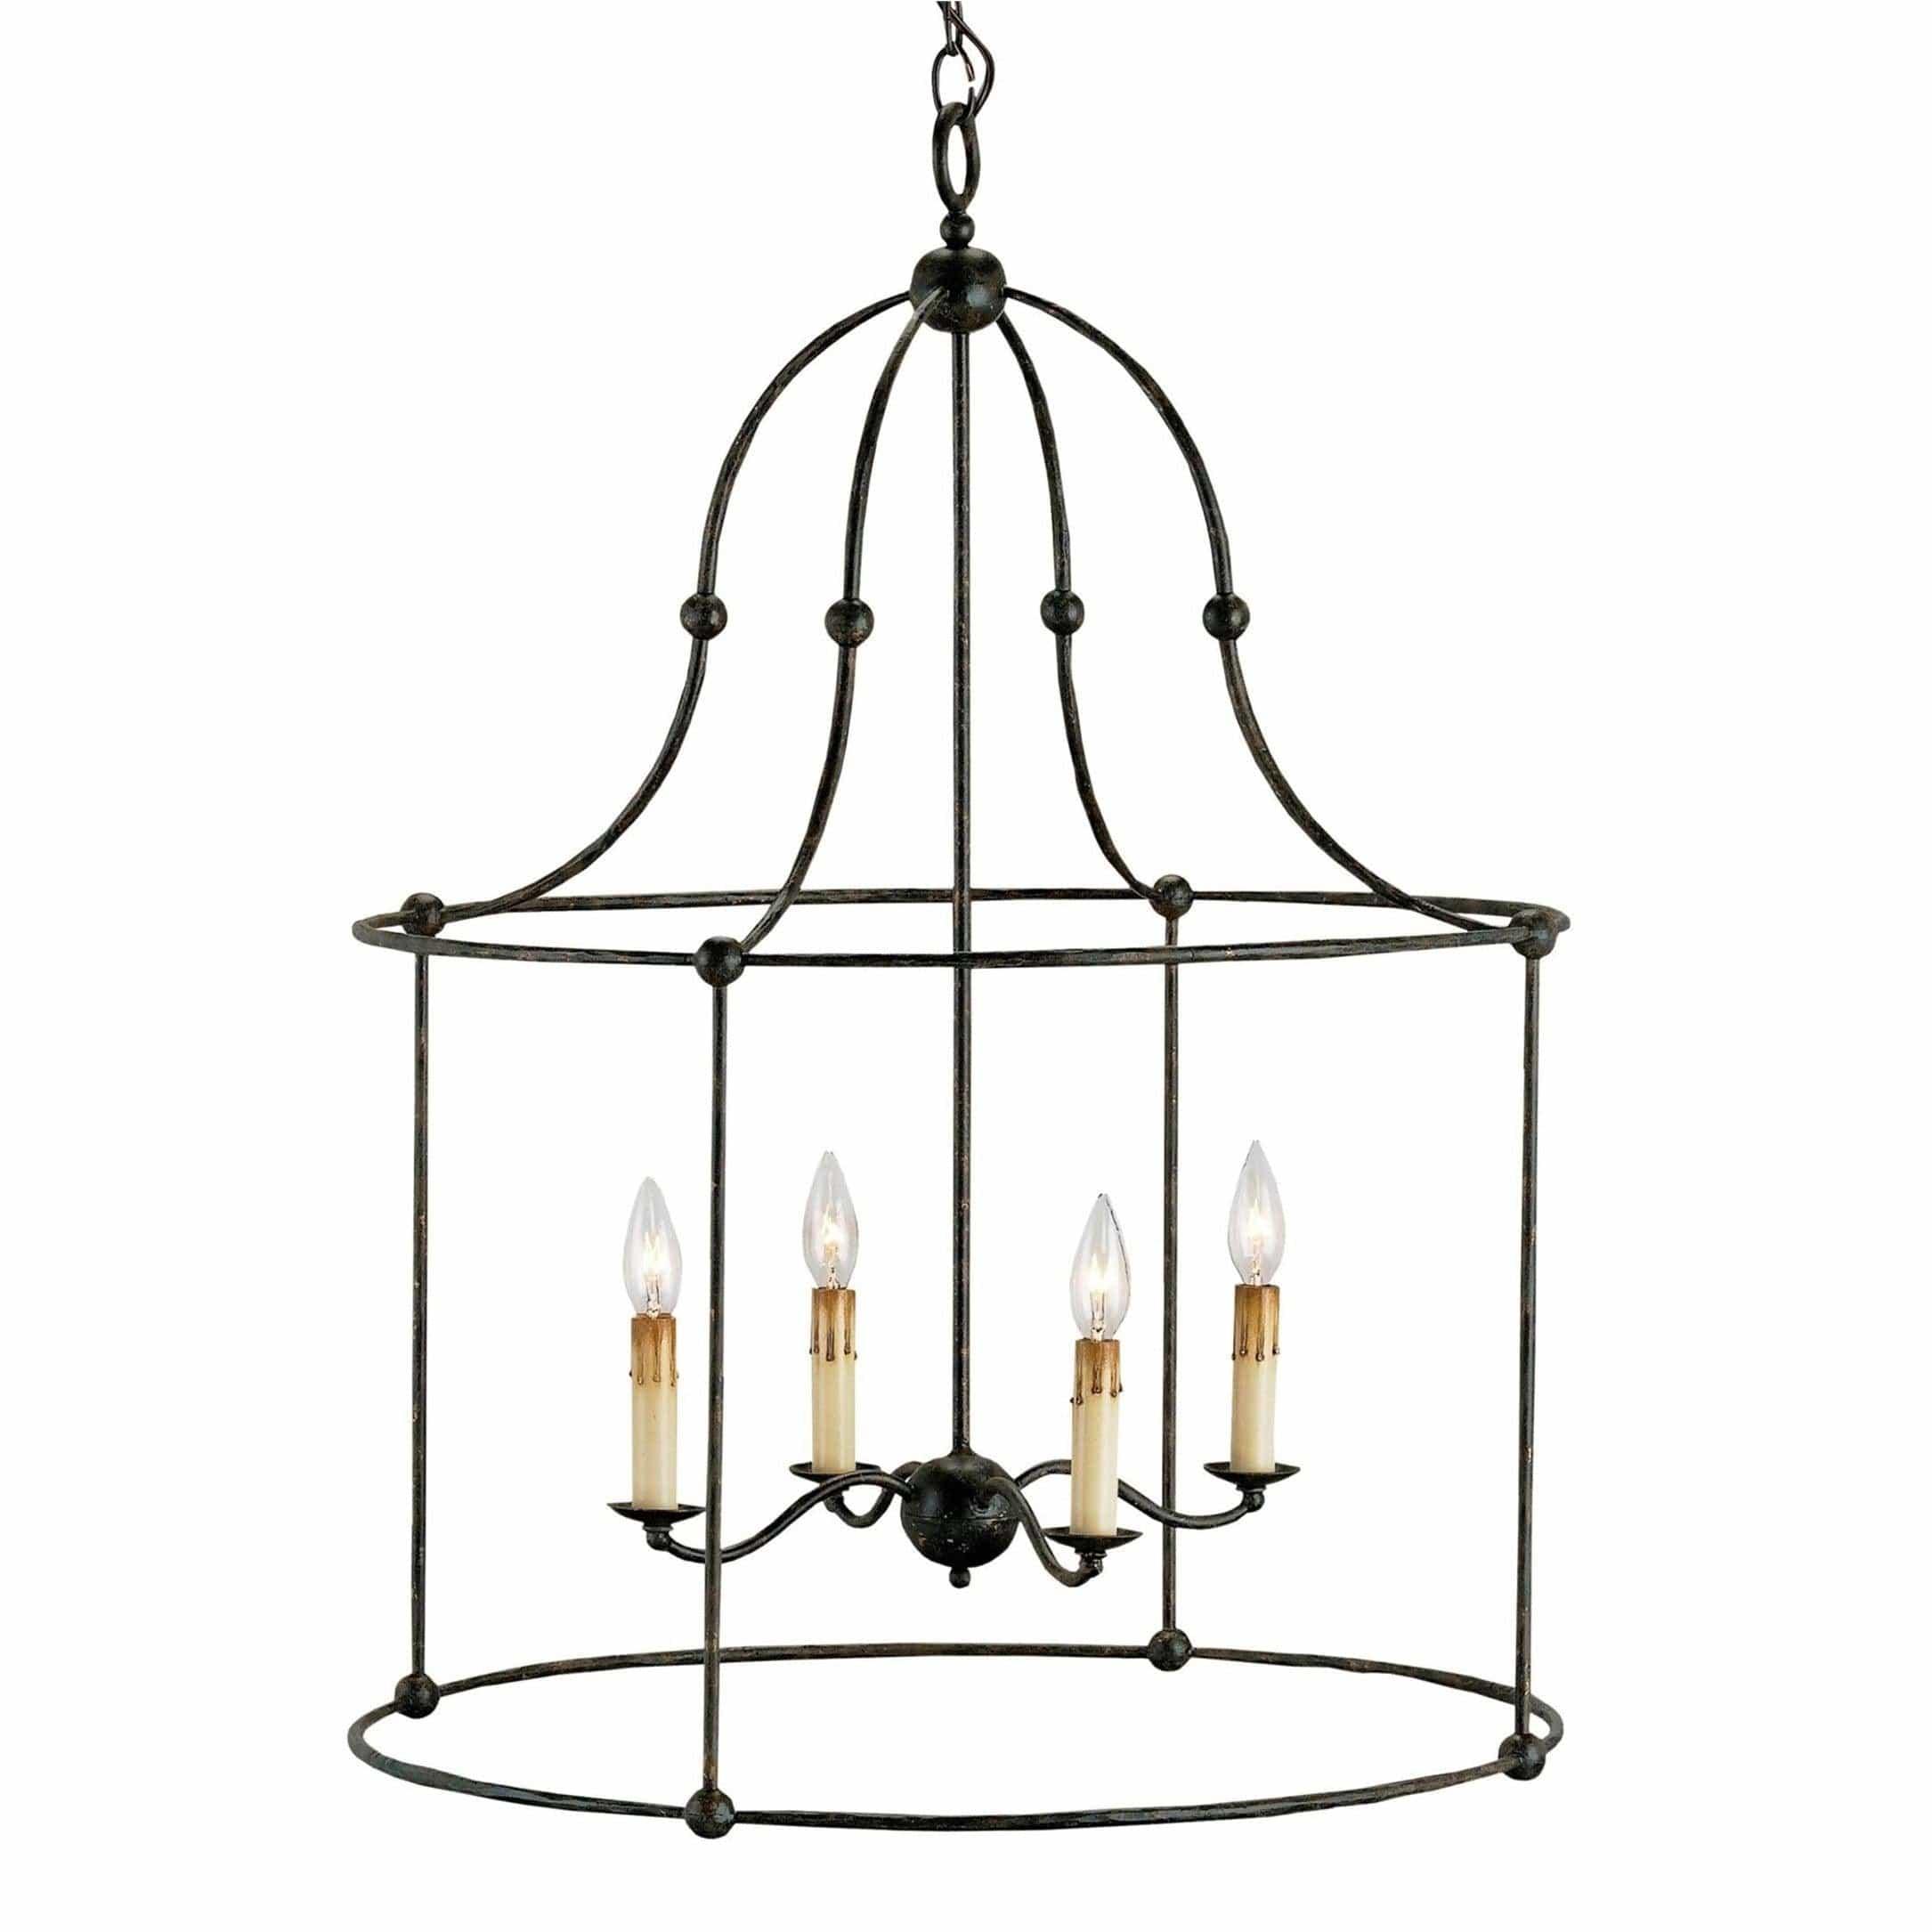 Currey and Company - Fitzjames Lantern - 9160 | Montreal Lighting & Hardware